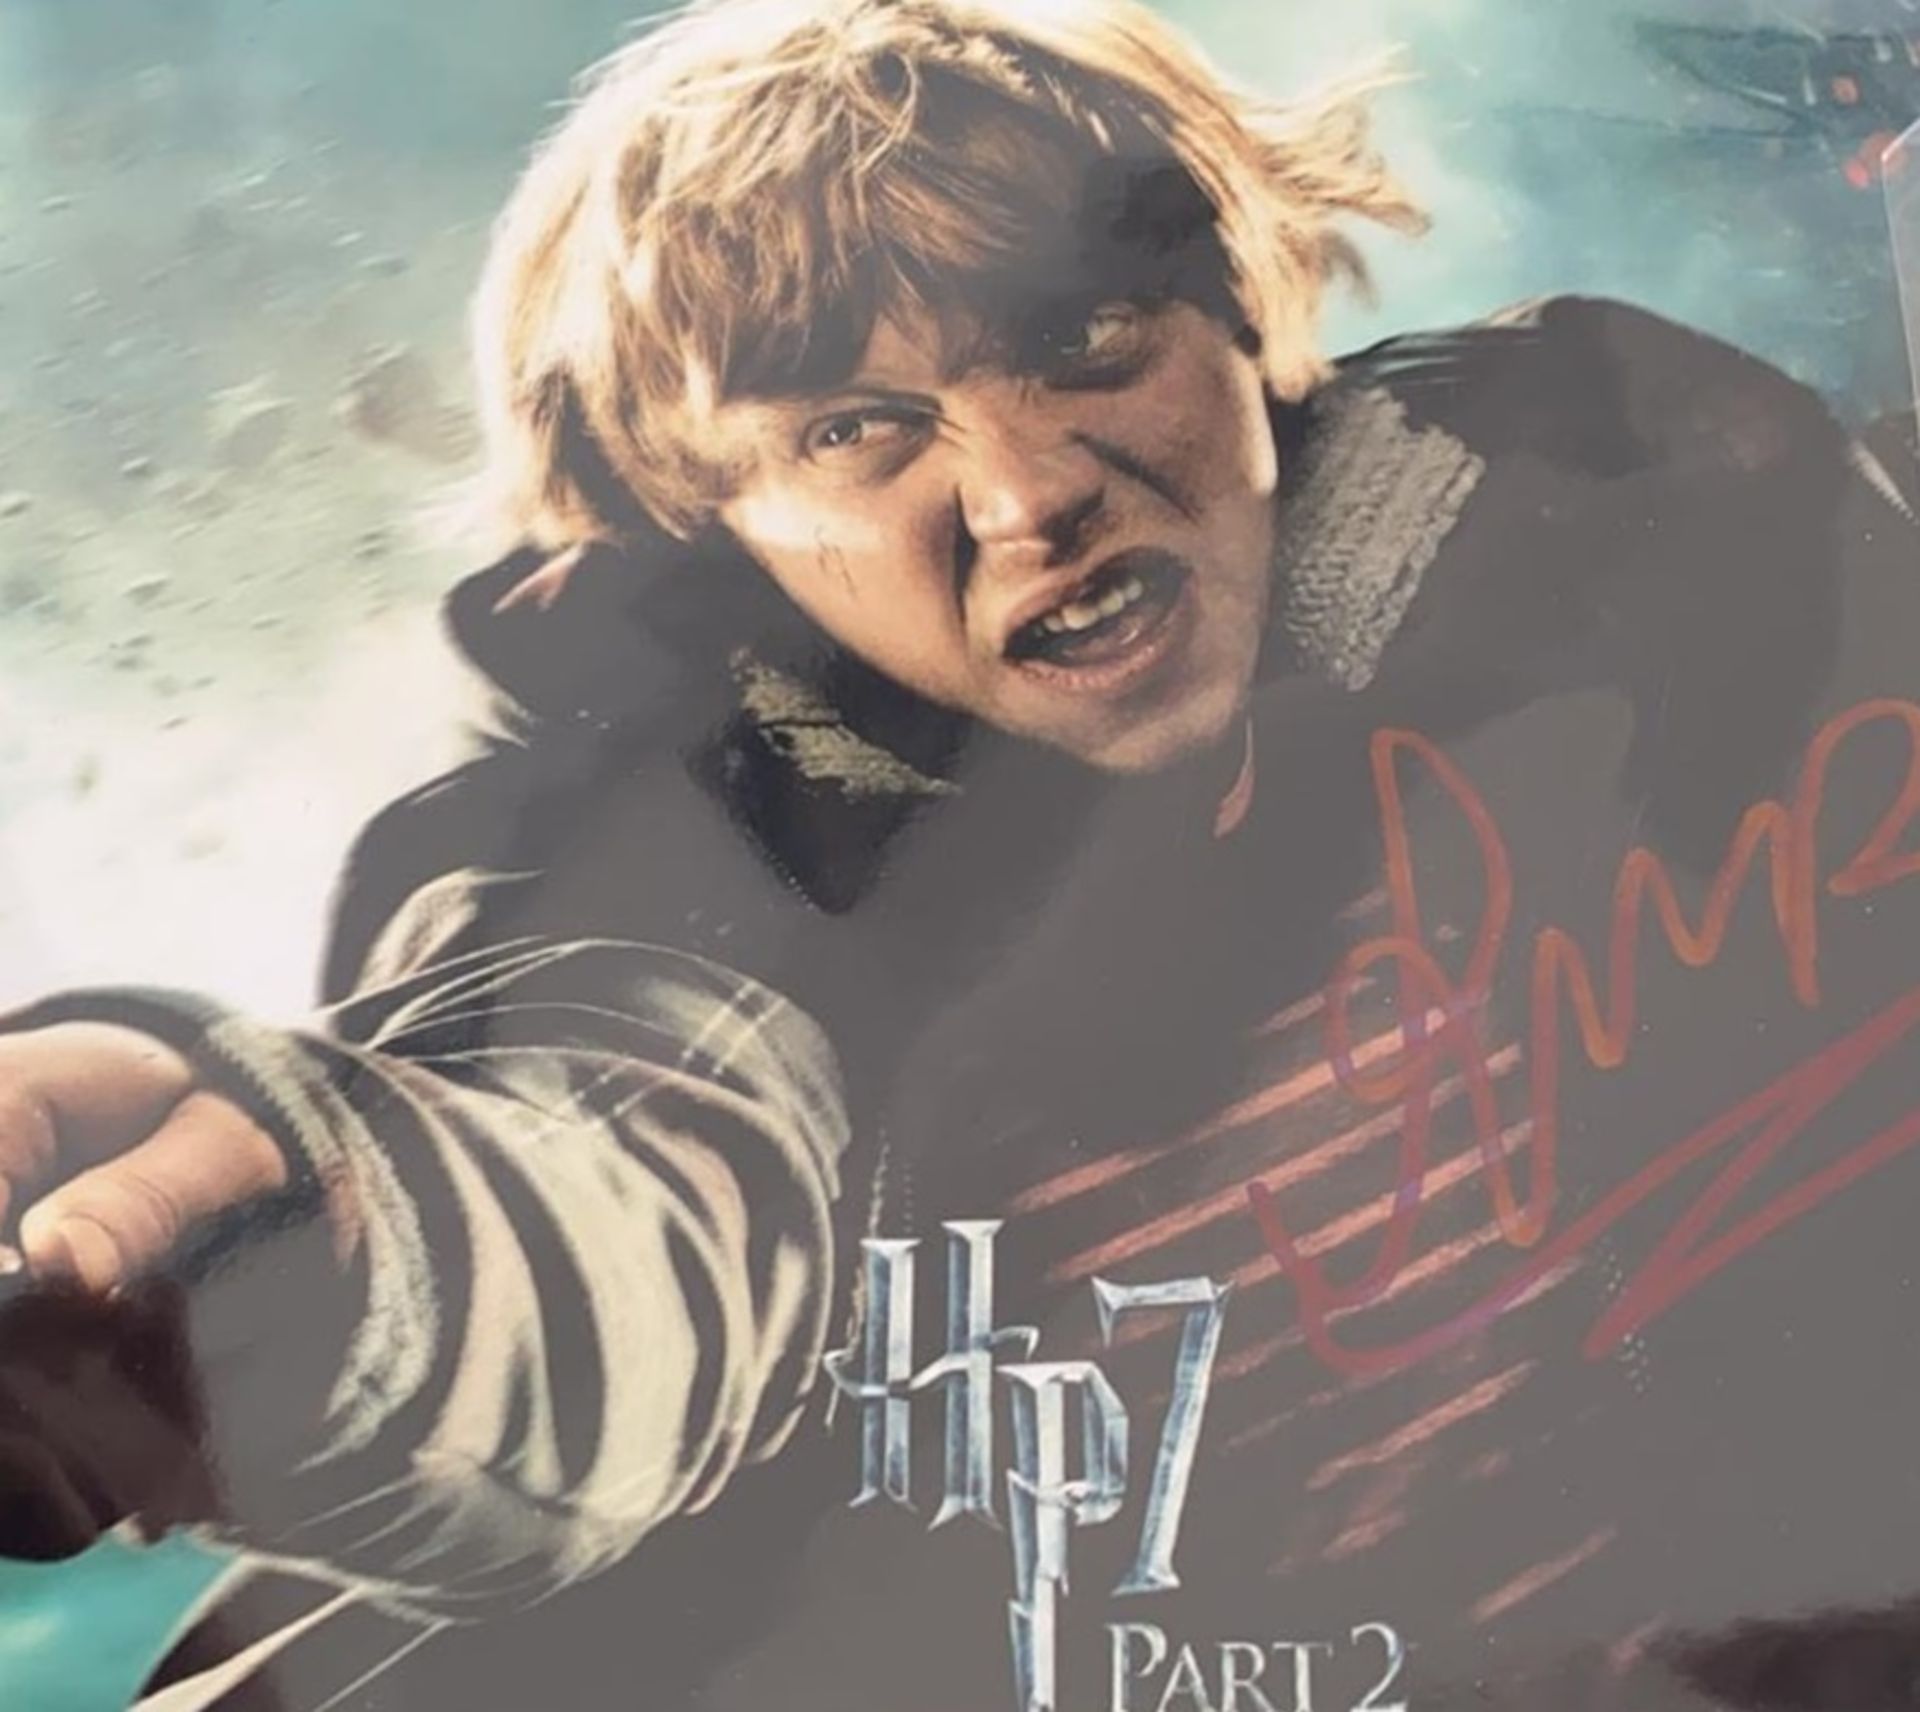 1 x Signed Autograph Picture - HARRY POTTER RUPERT GRINT - With COA - Size 12 x 8 Inch - CL590 -